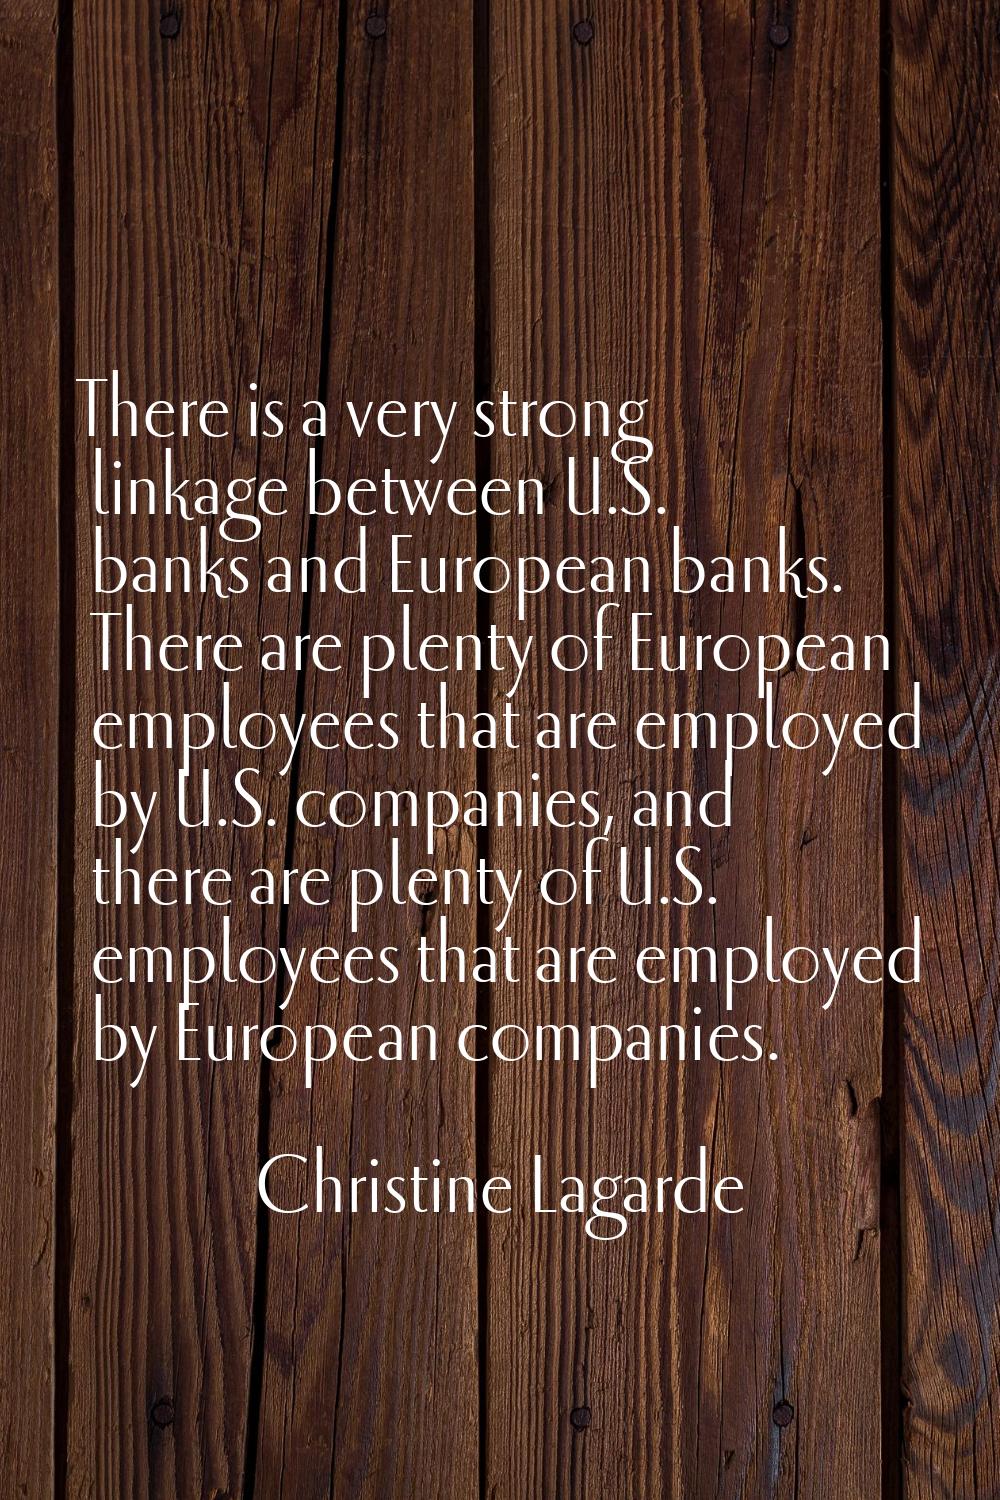 There is a very strong linkage between U.S. banks and European banks. There are plenty of European 